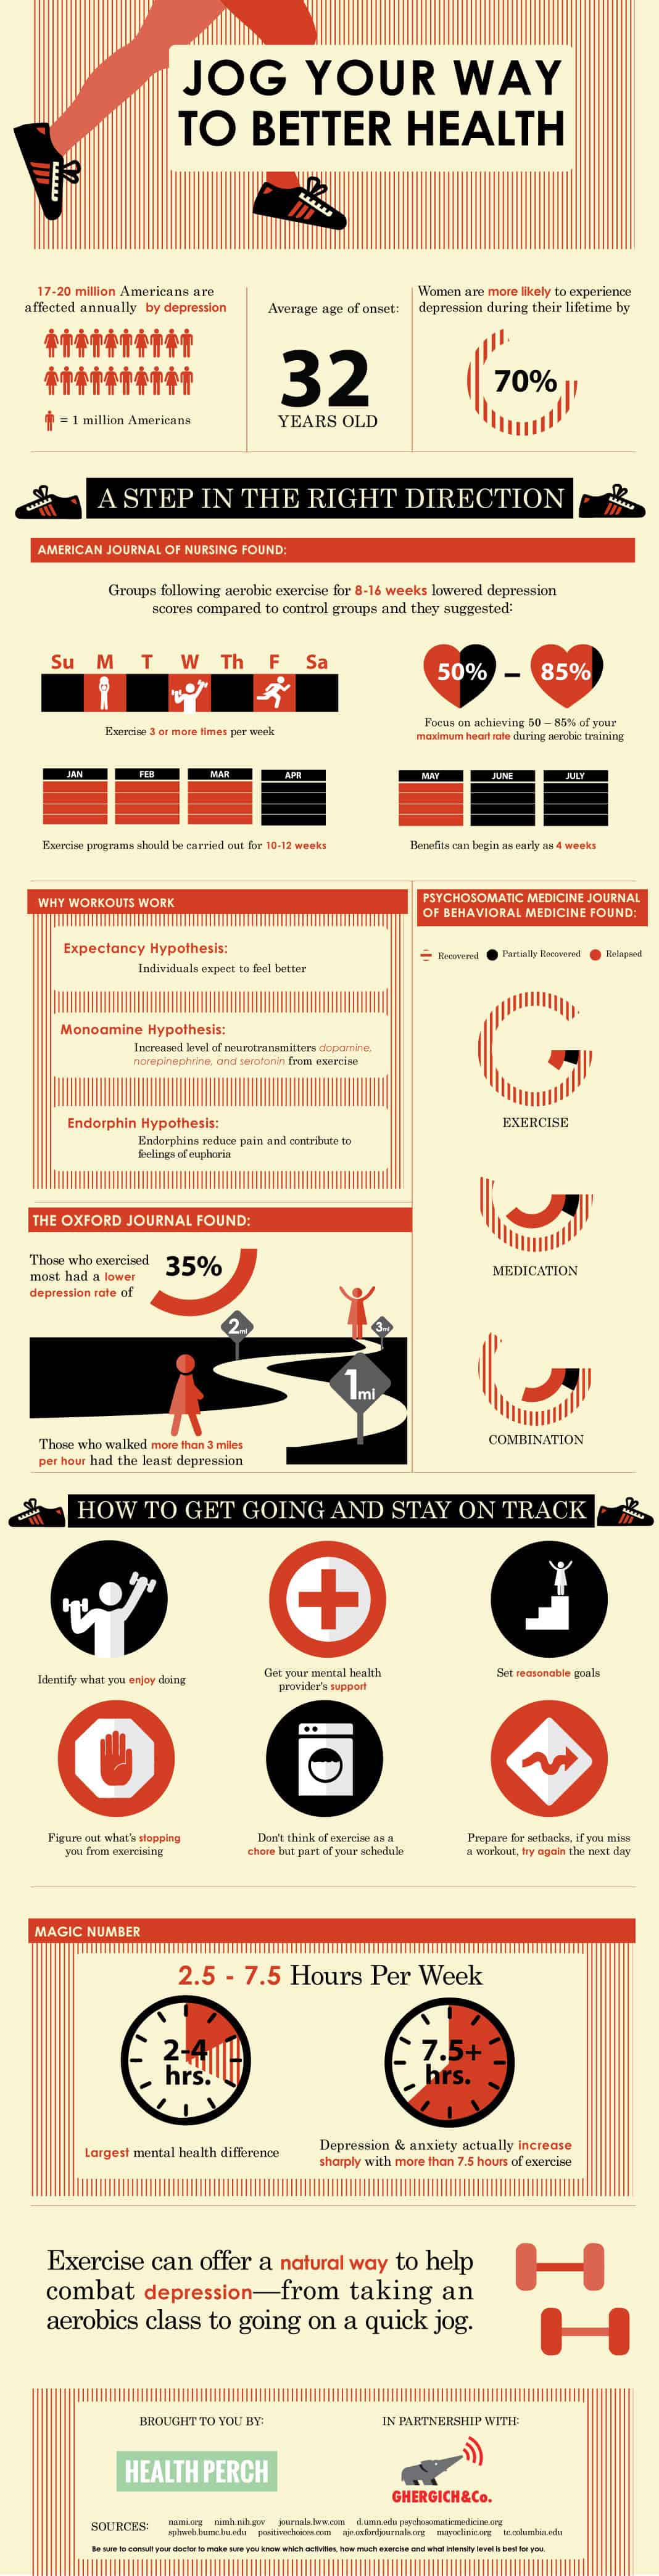 Jog Your Way To Better Health Infographic Exploring The Relationship between Jogging & Depression - Exercising Helps Depression